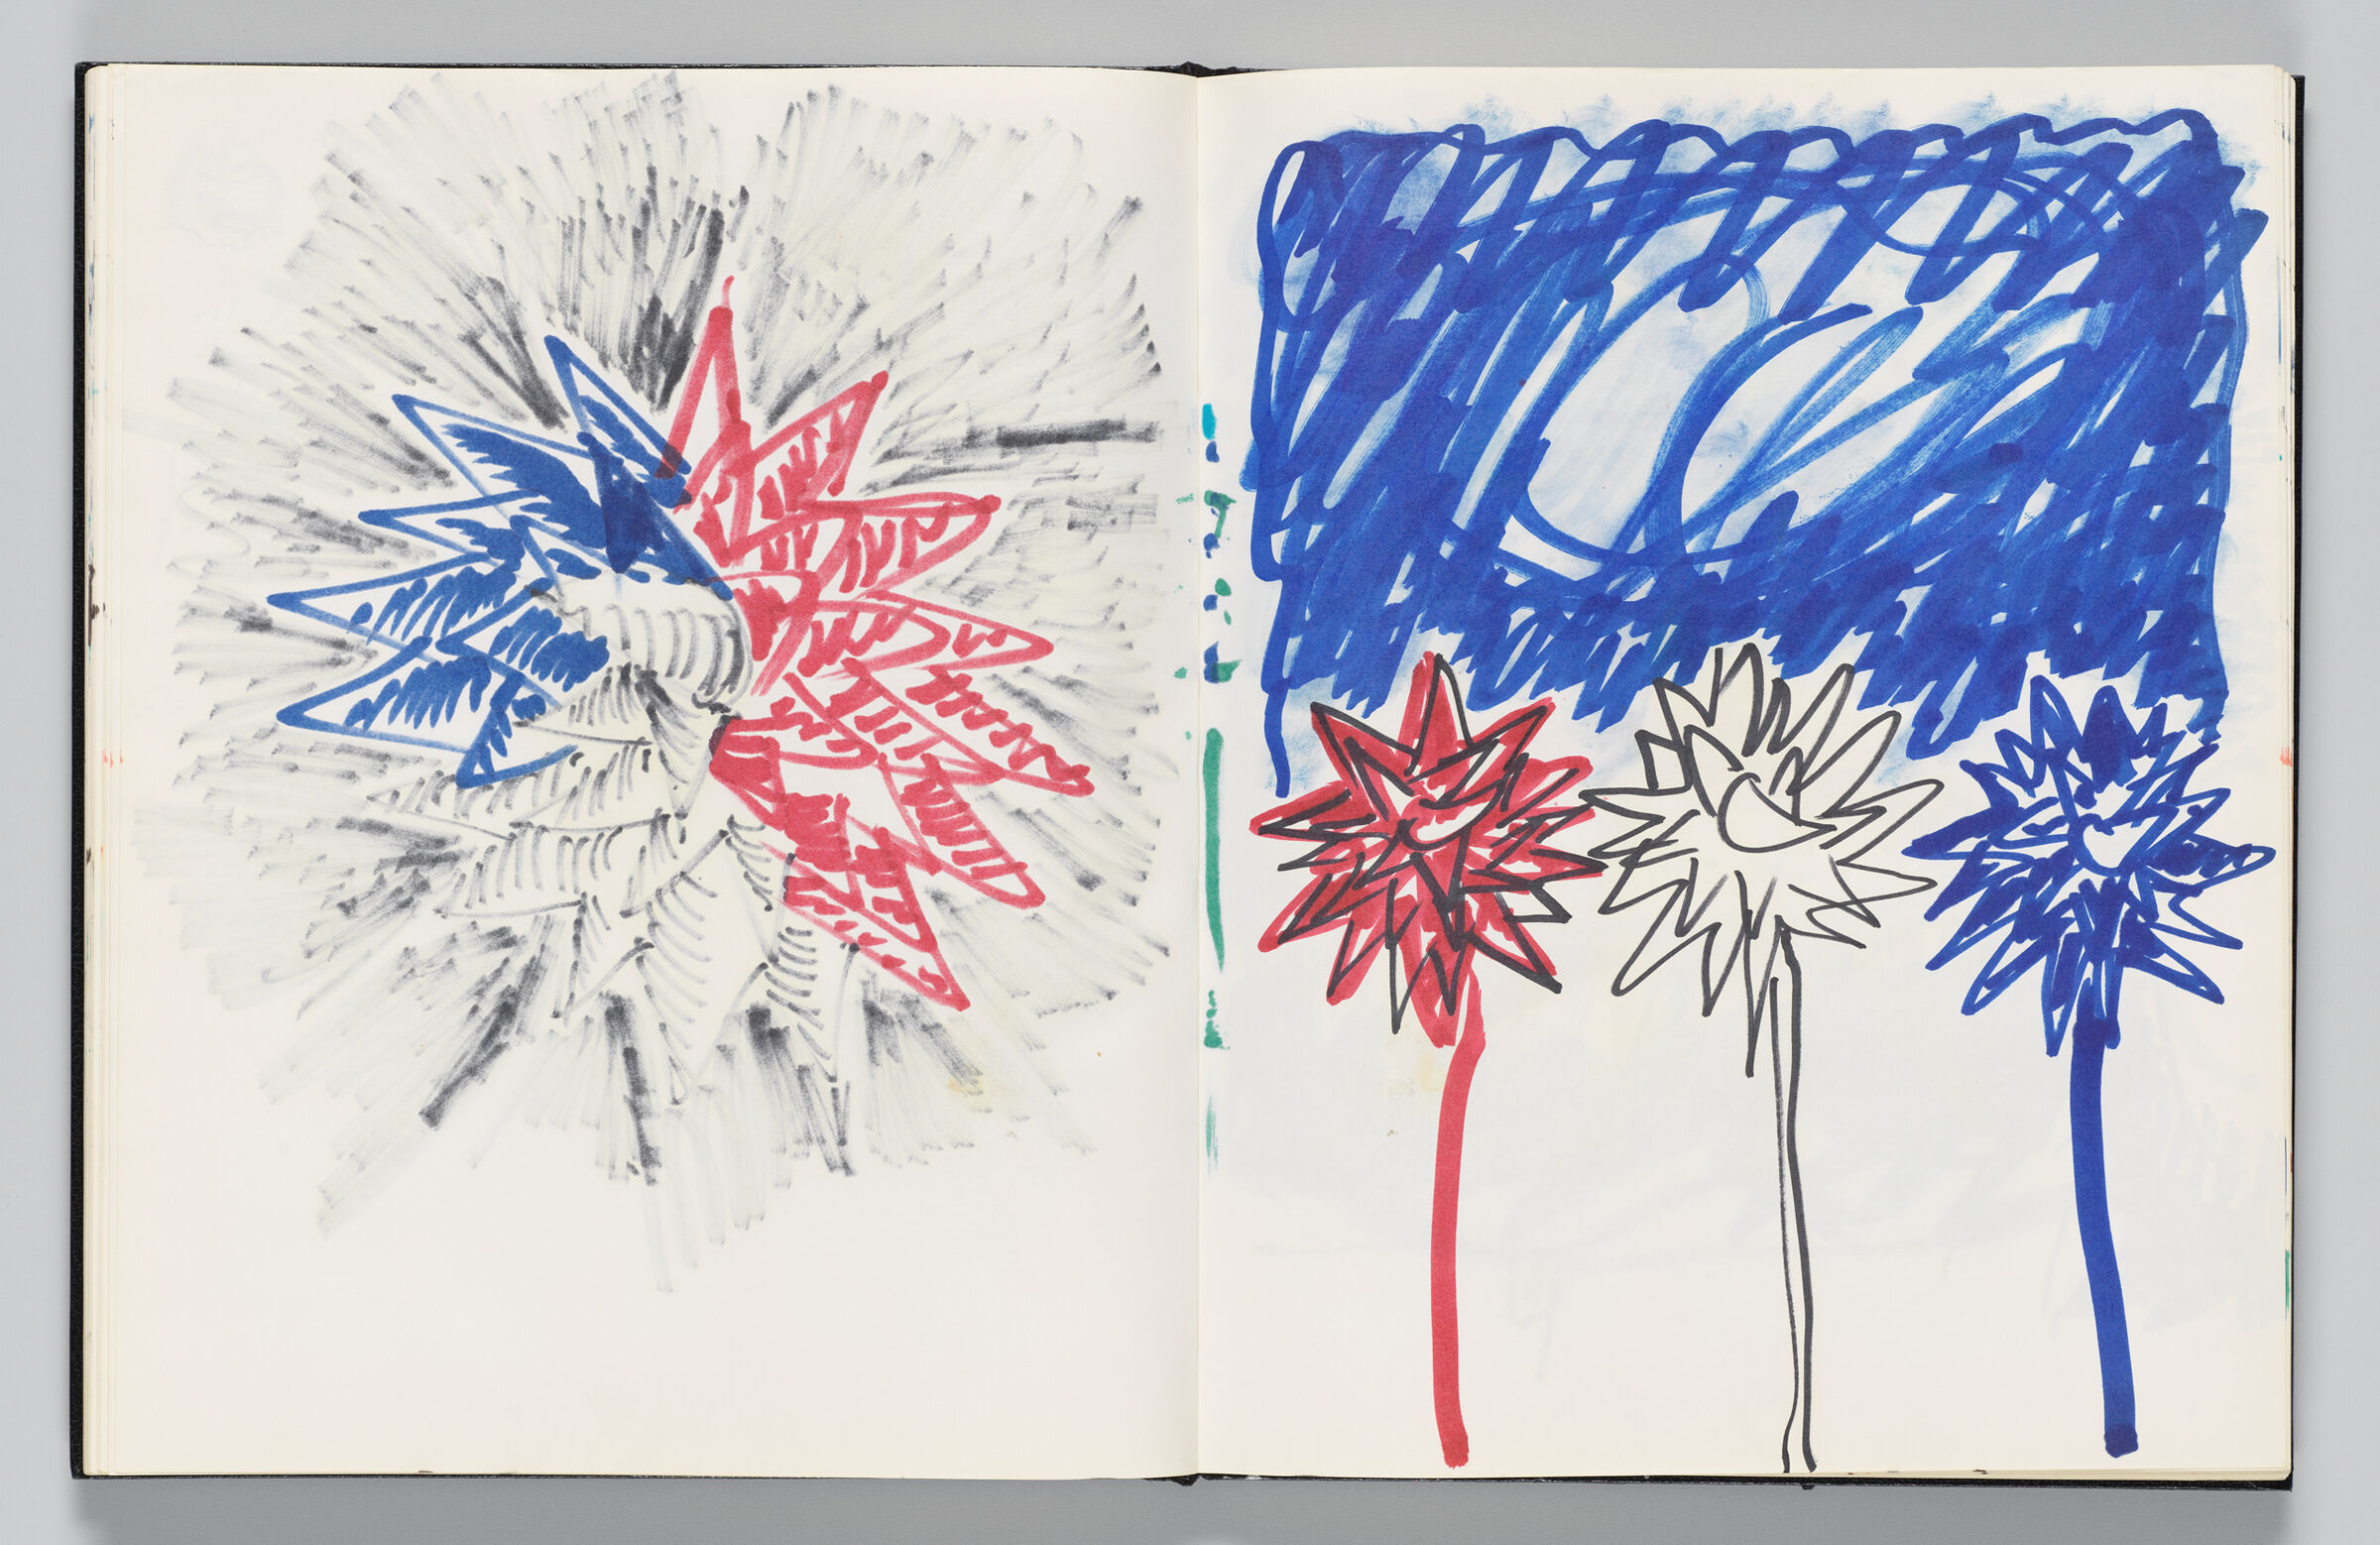 Untitled (Bleed-Through Of Previous Page, Left Page); Untitled (Red, White, And Blue Star Inflatables, Right Page)